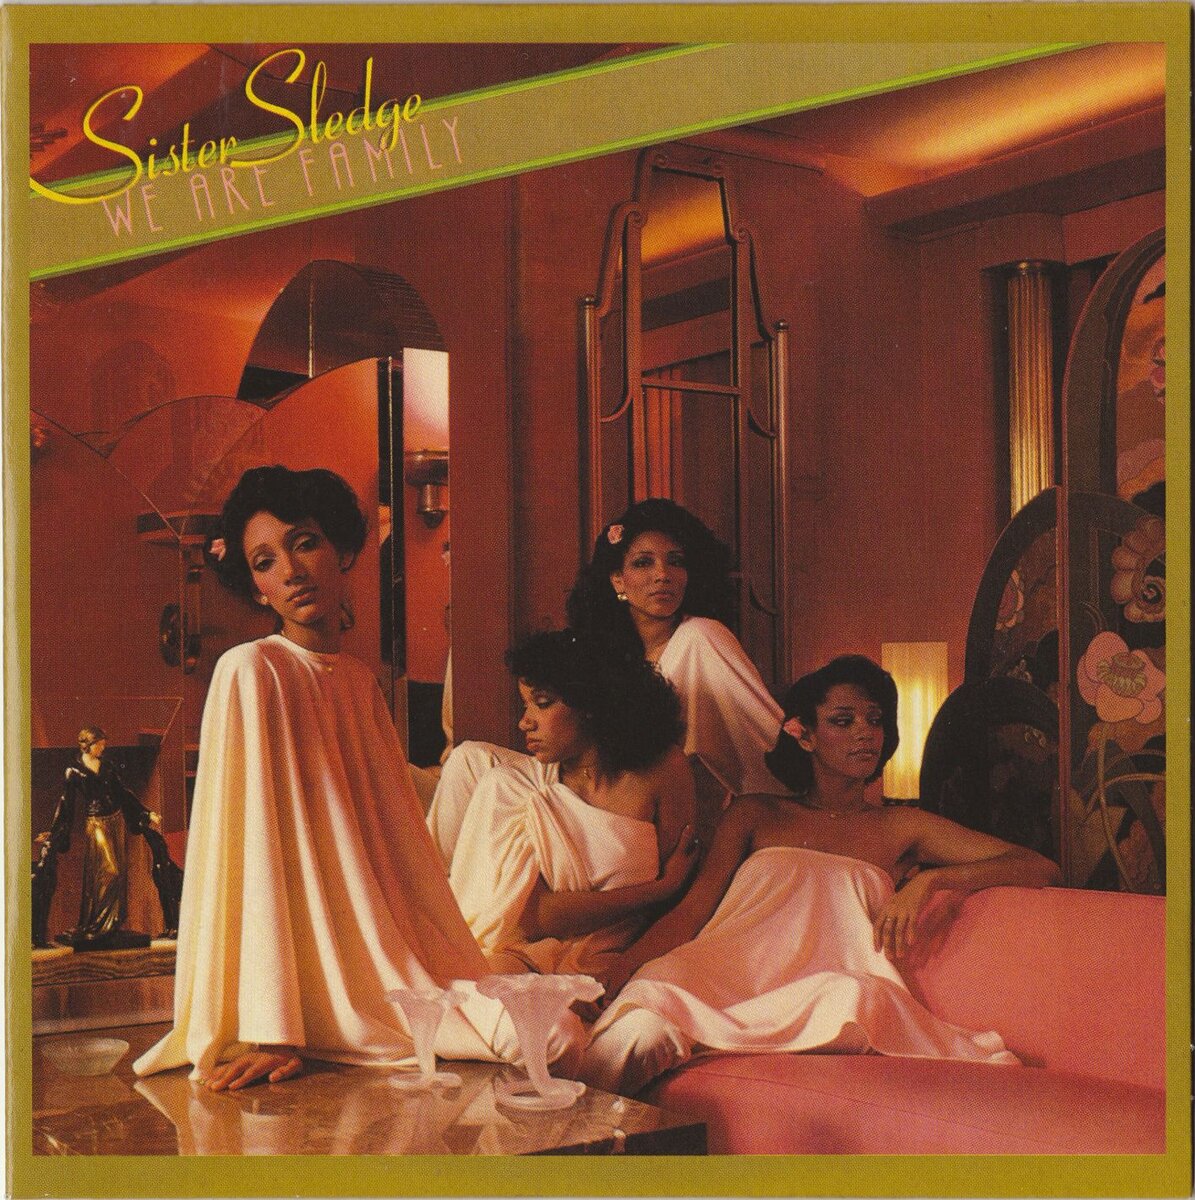 We are Family sister Sledge. Chic 1977. Sister Sledge - he's the Greatest Dancer. Chic 1977 Chic. We are family sister